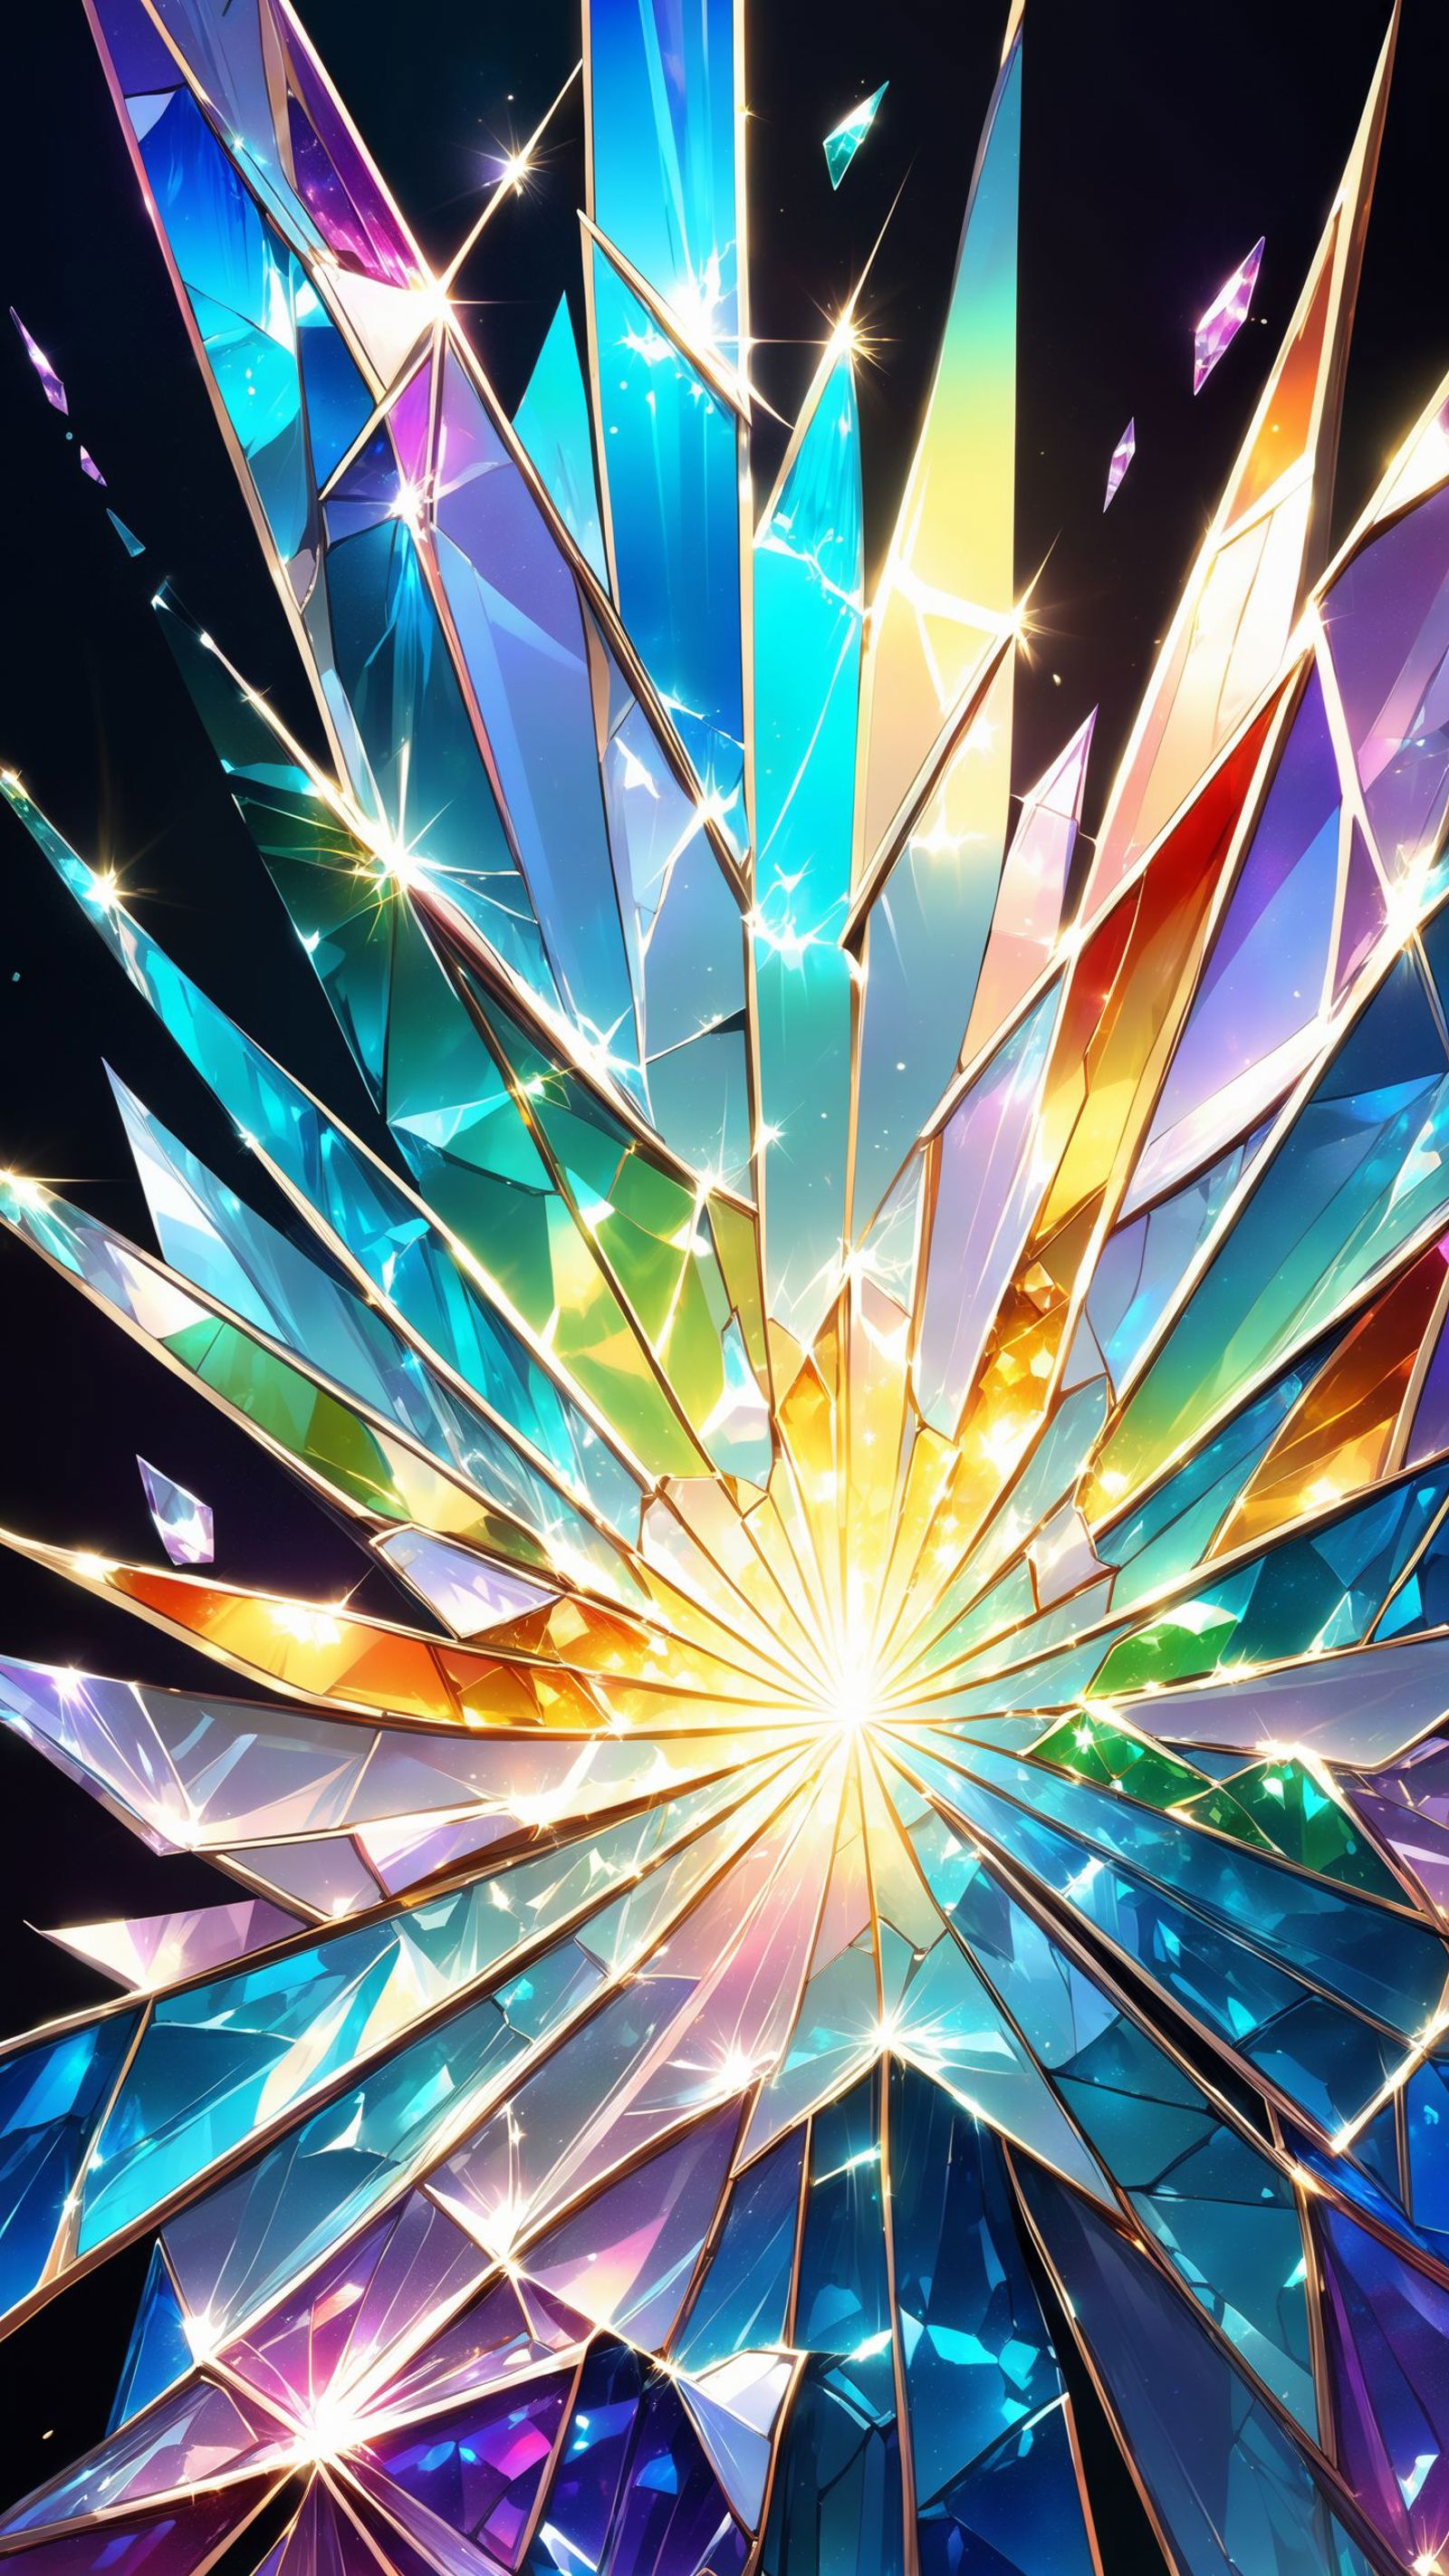 A Puzzle of Rainbow-Colored Crystals with a Sun in the Middle